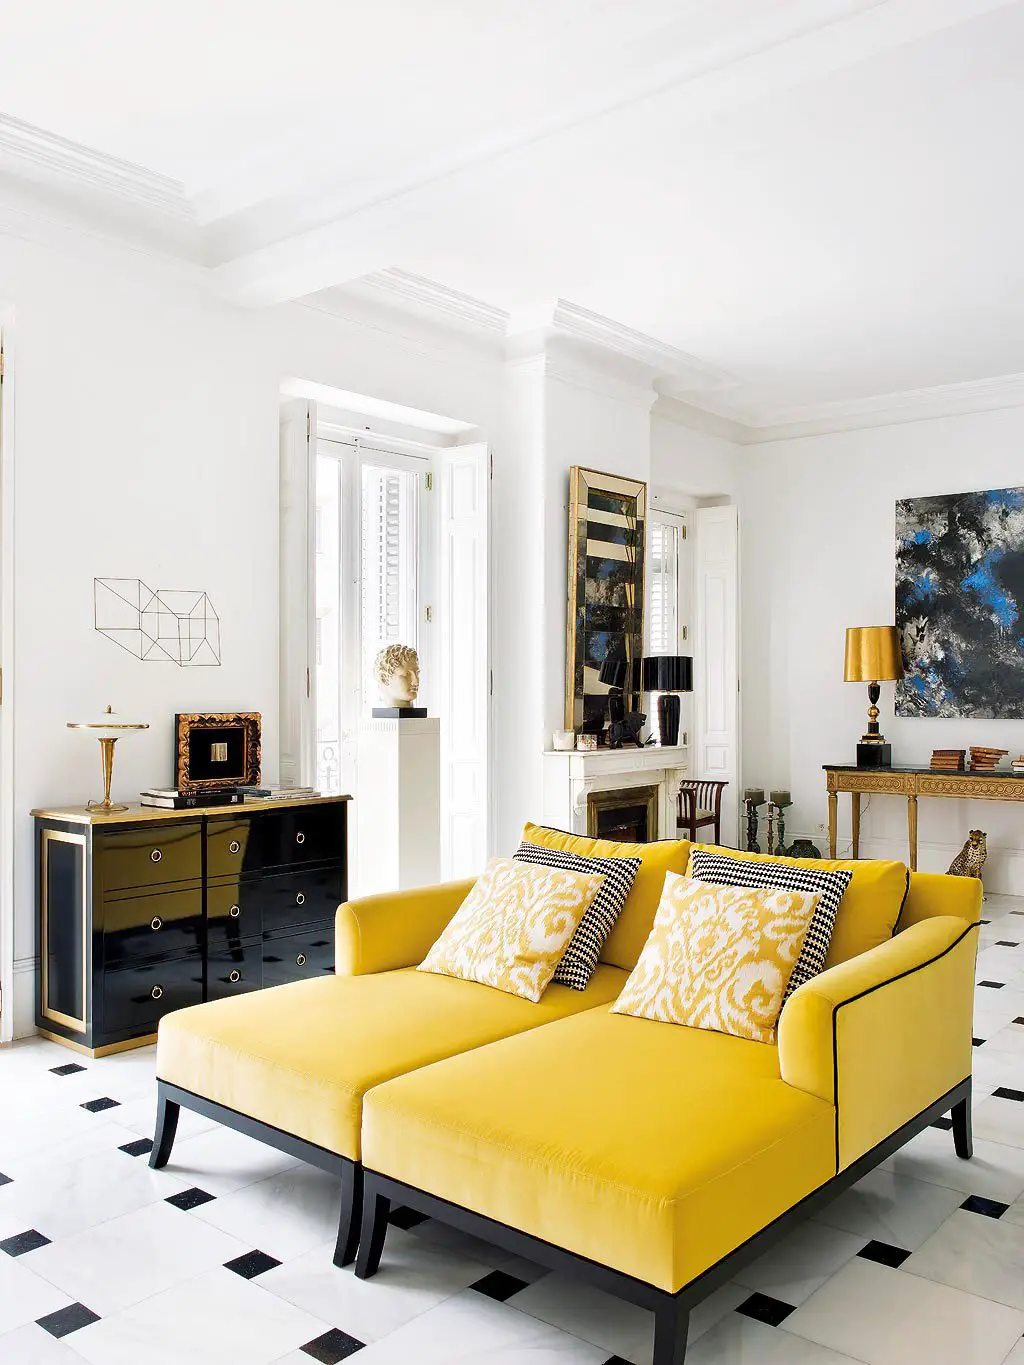 Two yellow chaises in the living room via @thouswellblog